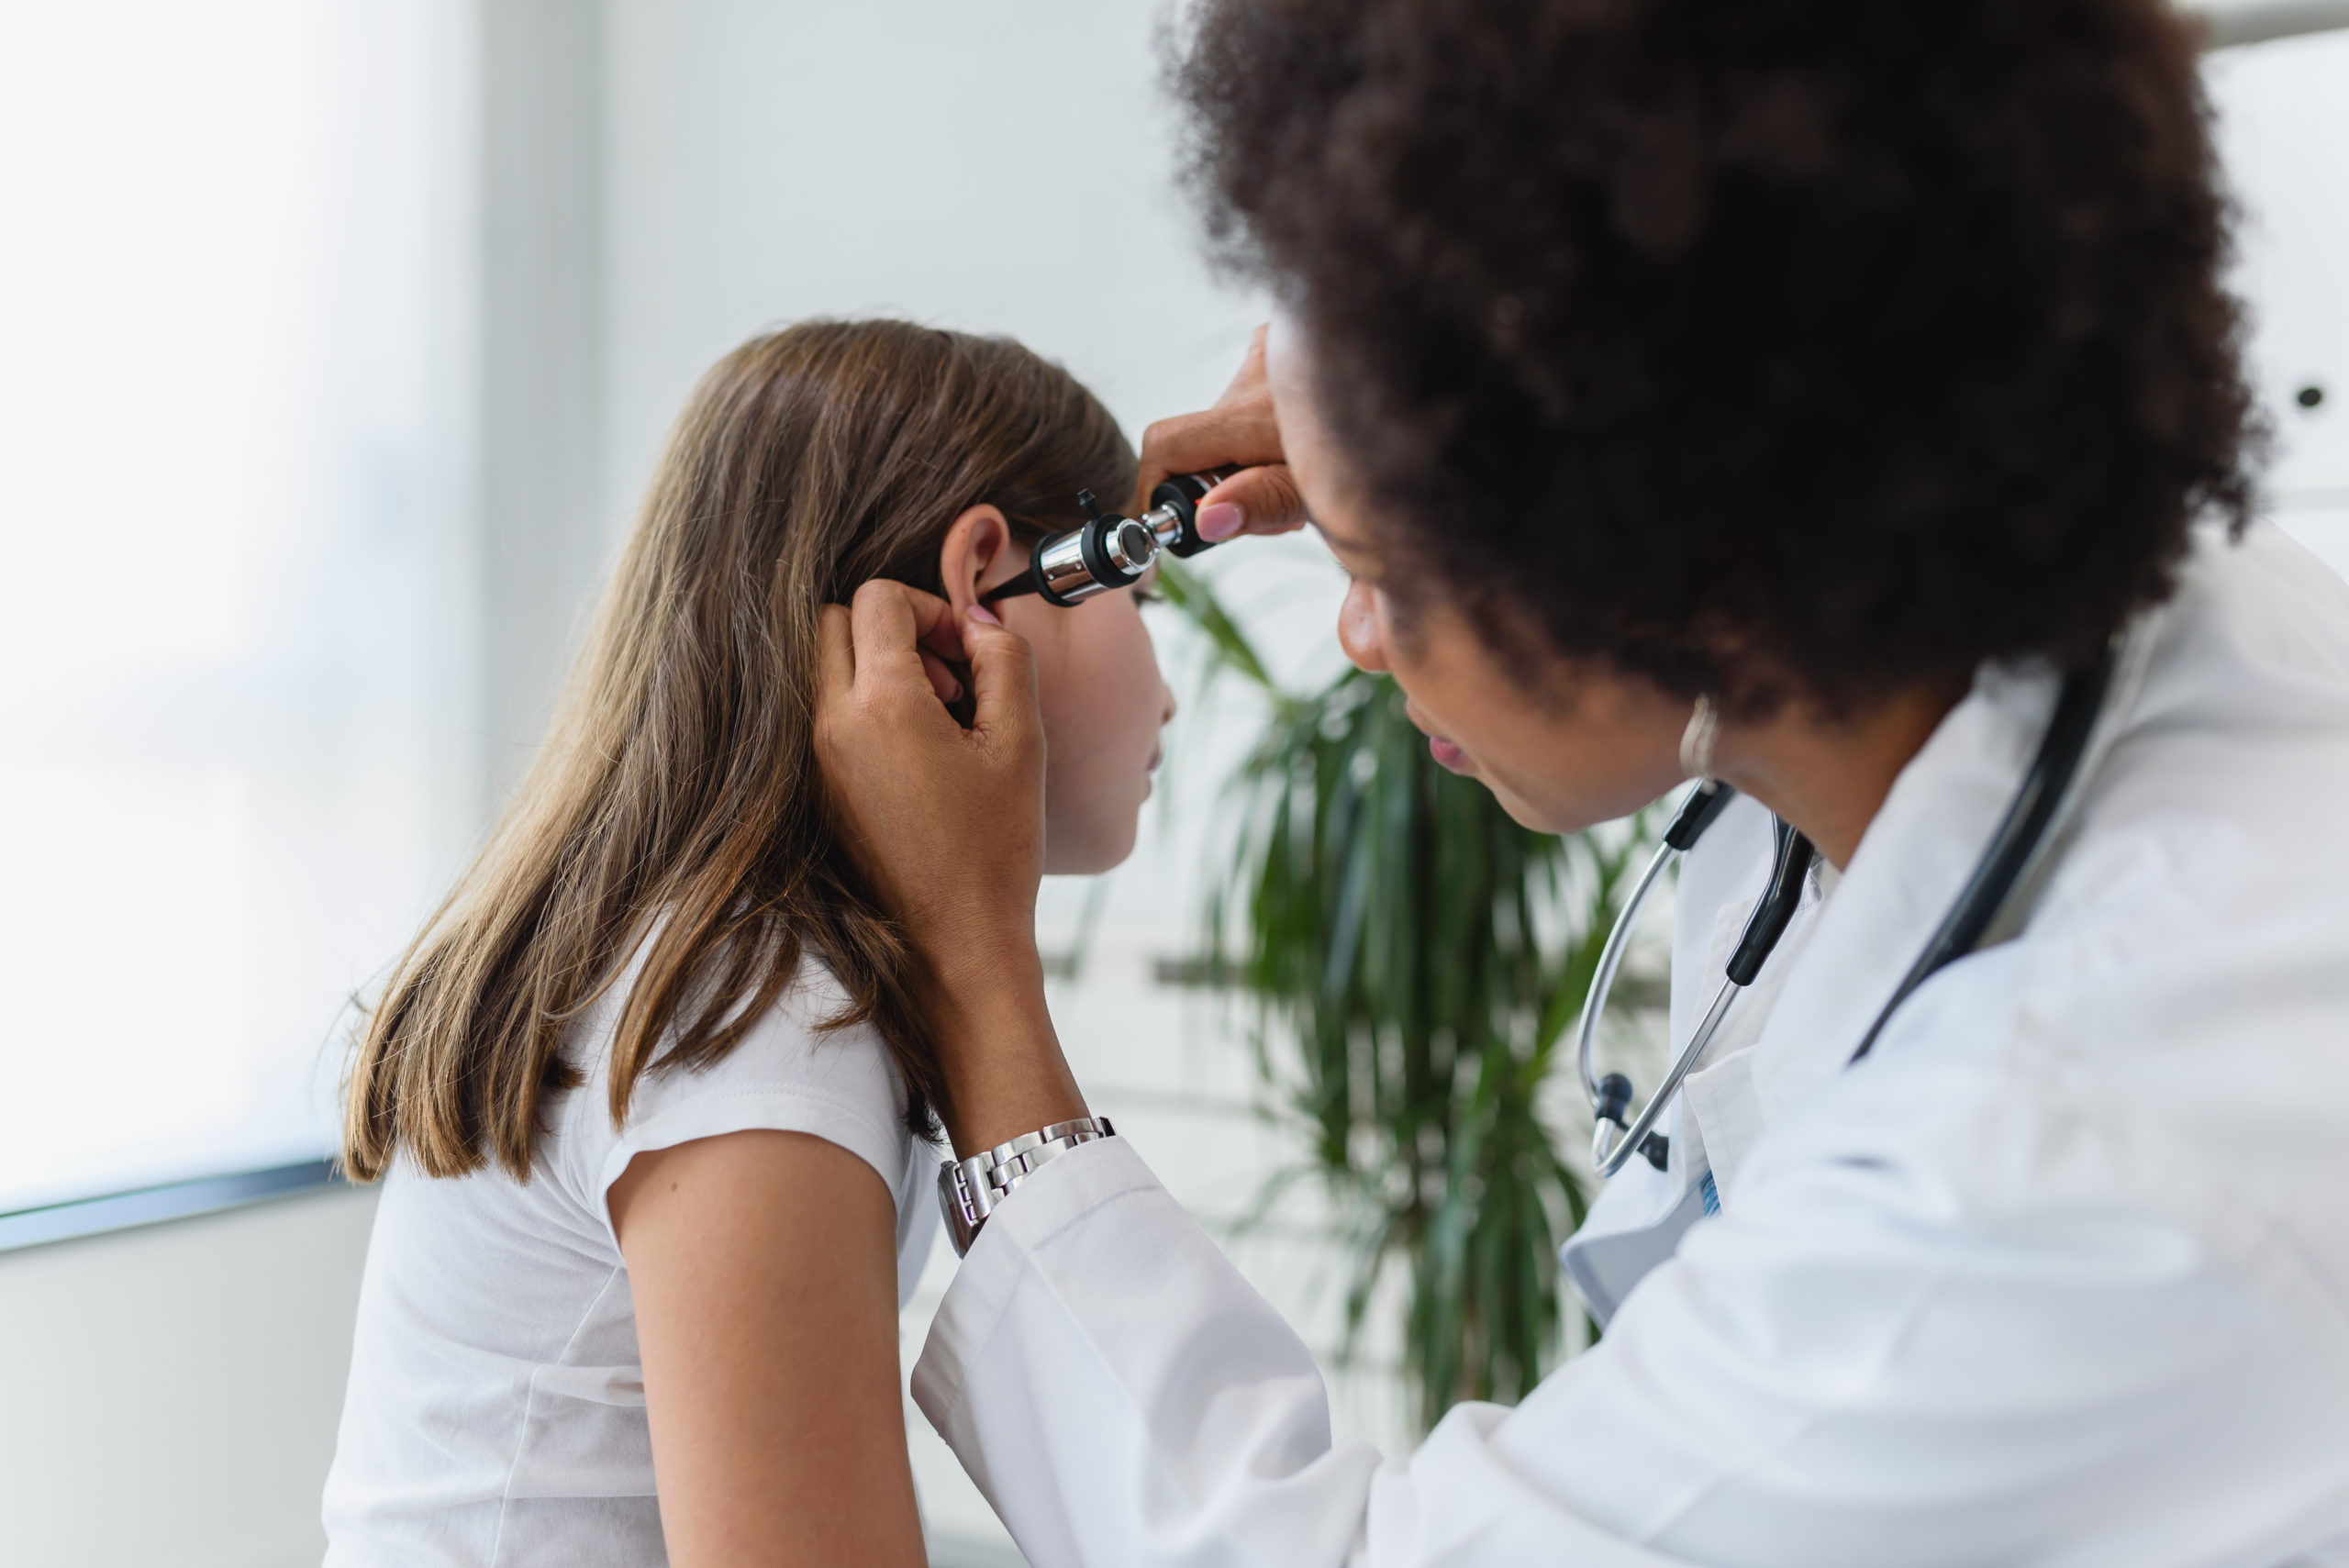 doctor examining young girl's ear to prescribe the best antibiotic for ear infection treatment